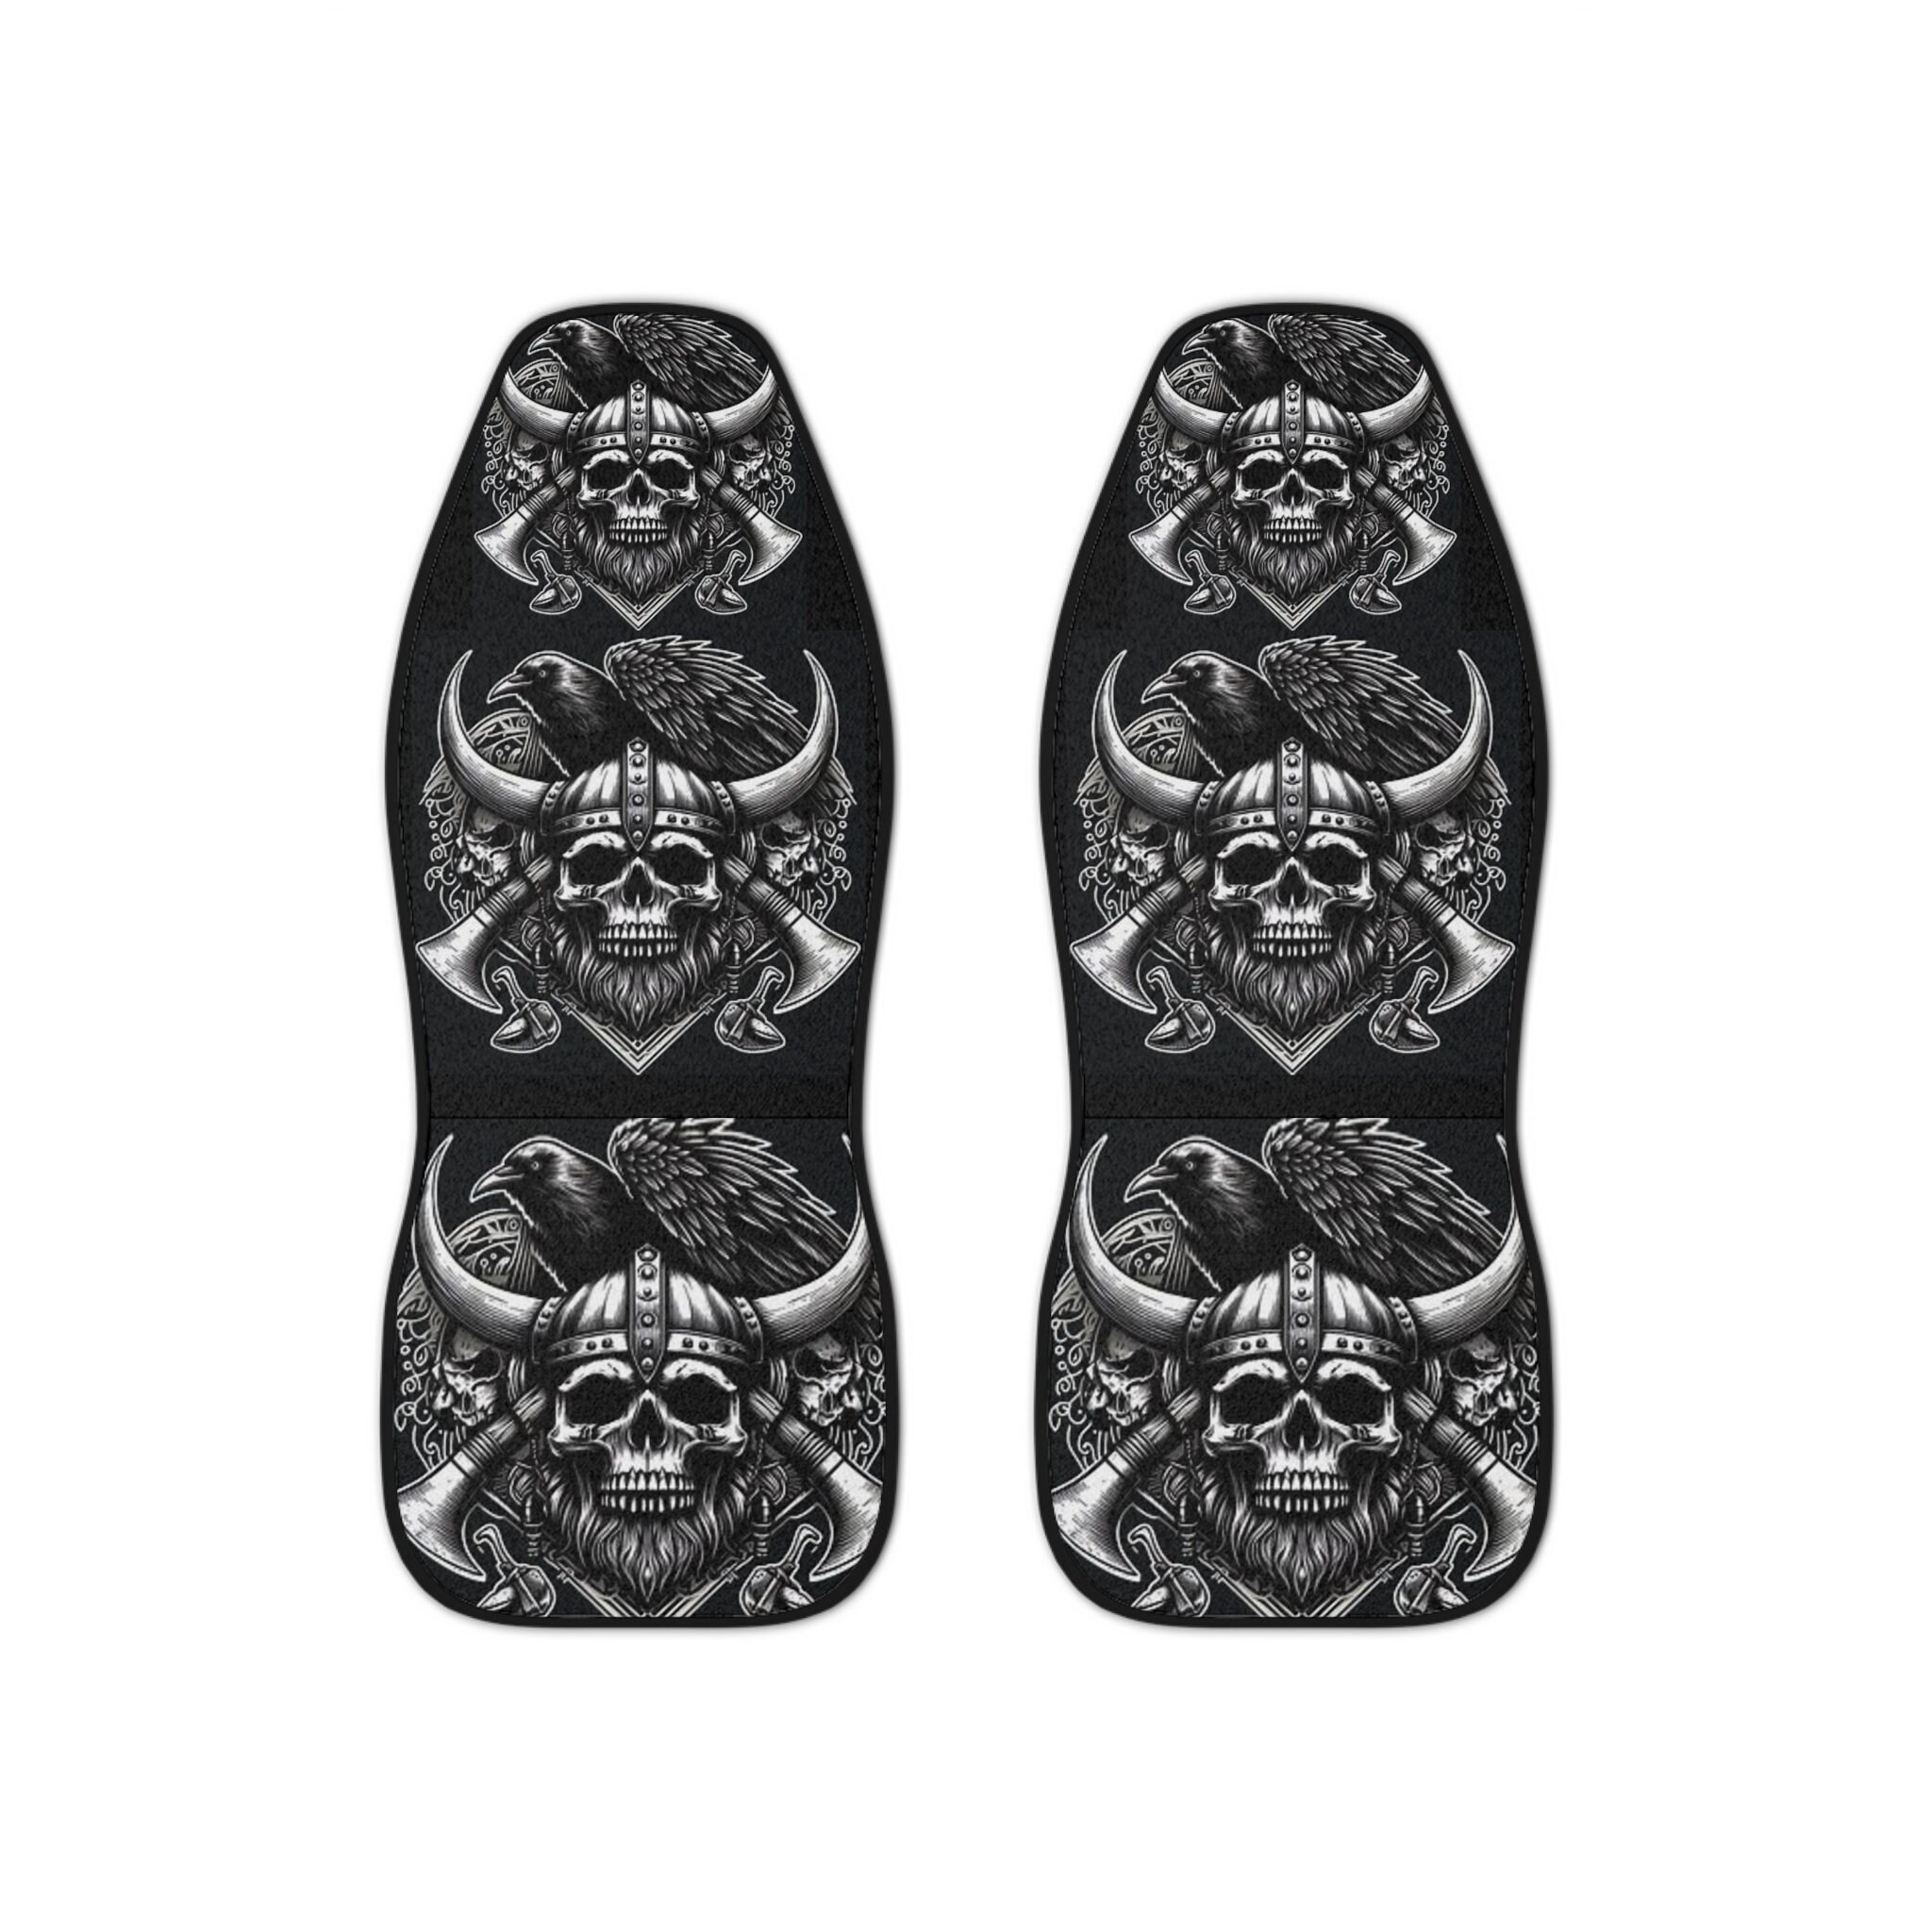 The Viking 3D Design Car Seat Covers